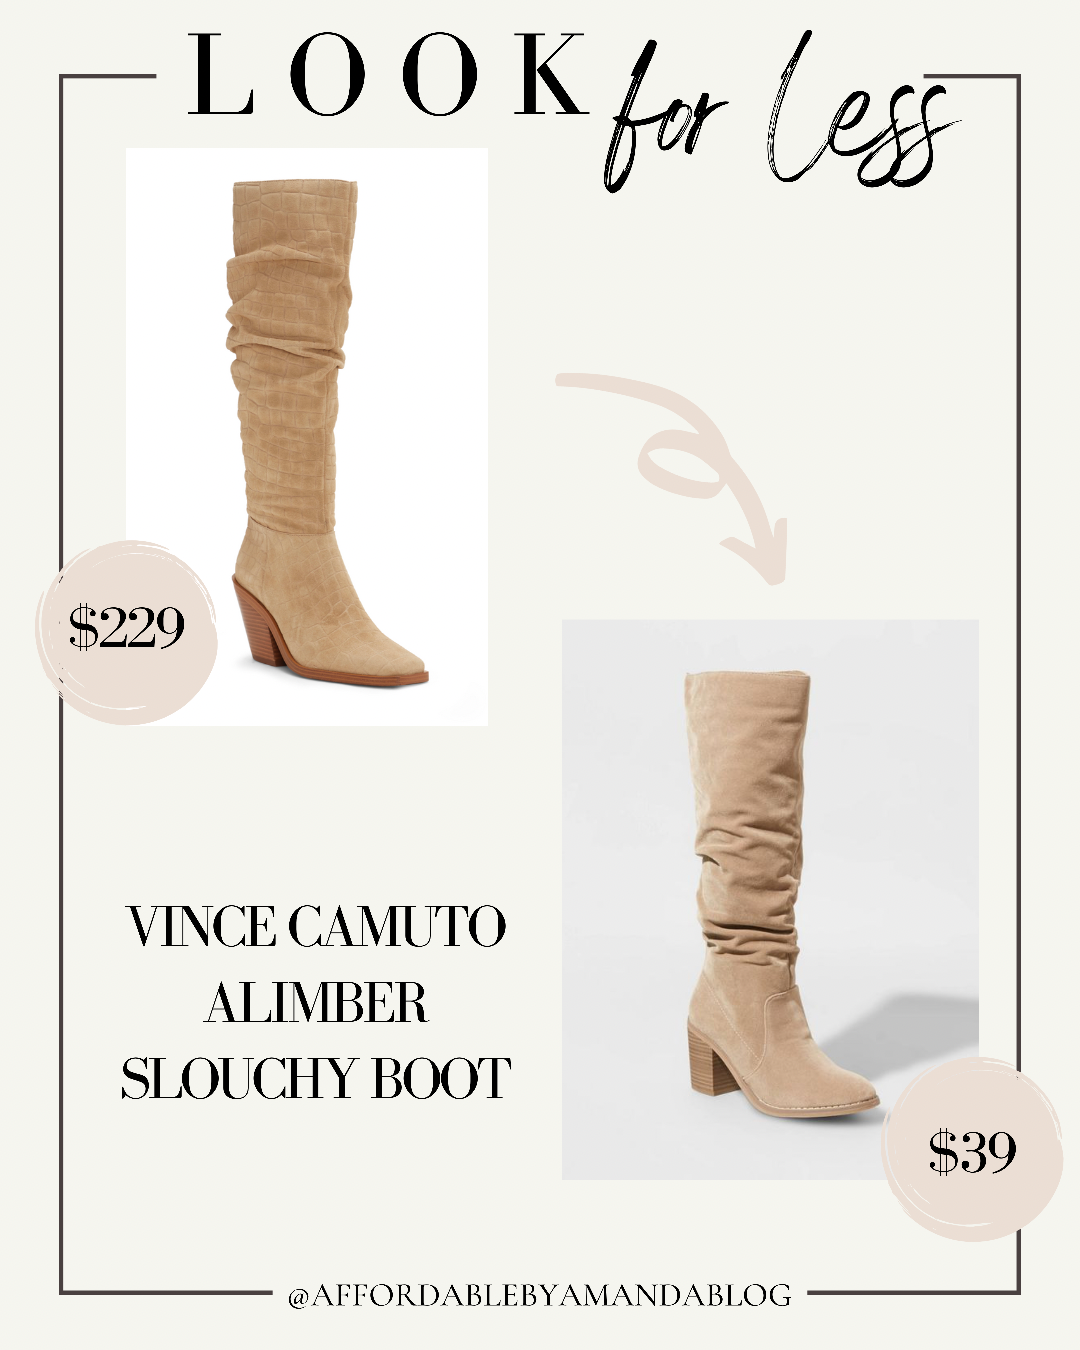 Vince Camuto Alimber Slouchy Boots | Affordable by Amanda